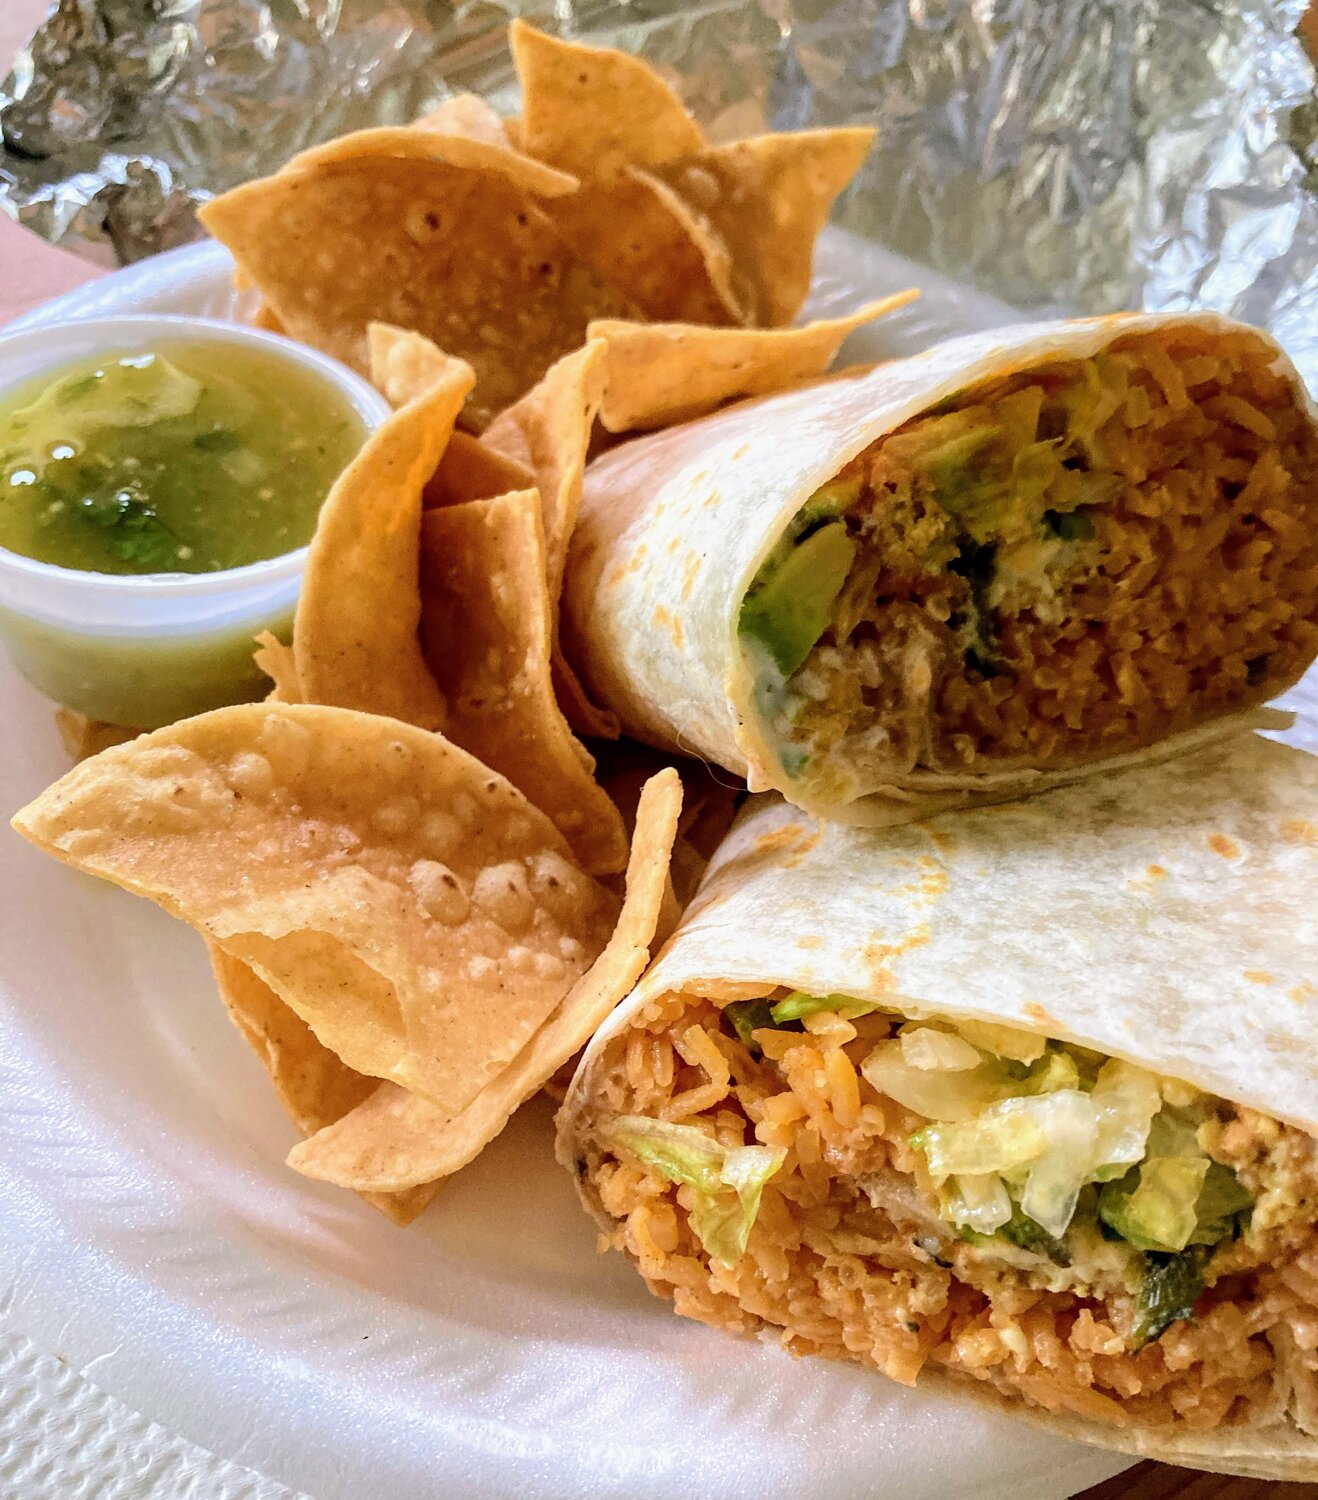 El Oasis’ Veggie Oasis Burrito stands apart from its meat-filled counterparts not only in the way many veggie options do, with the inclusion of the noble avocado, but with a fried, cheese-stuffed poblano pepper.